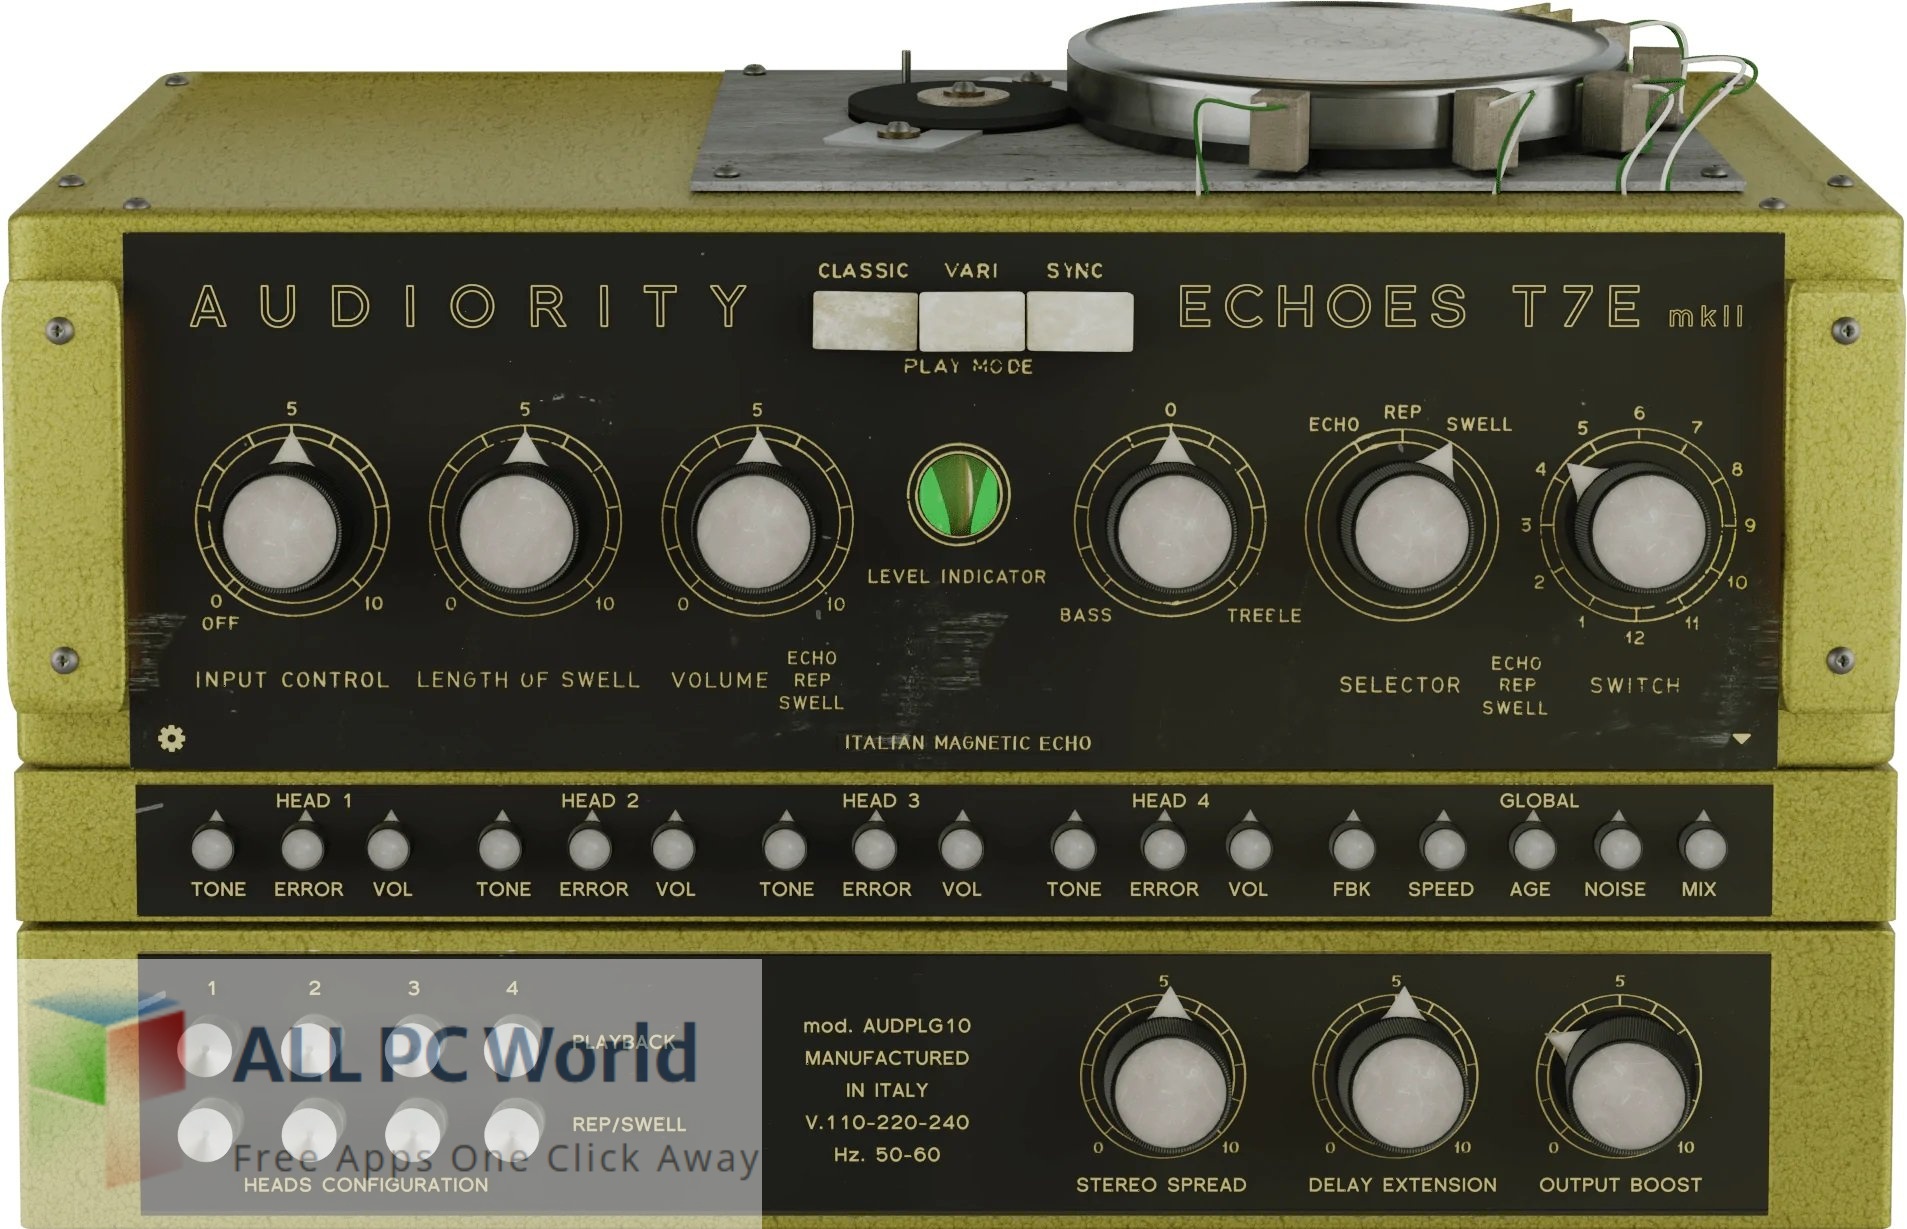 Audiority Echoes T7E MKII 2 Free Download